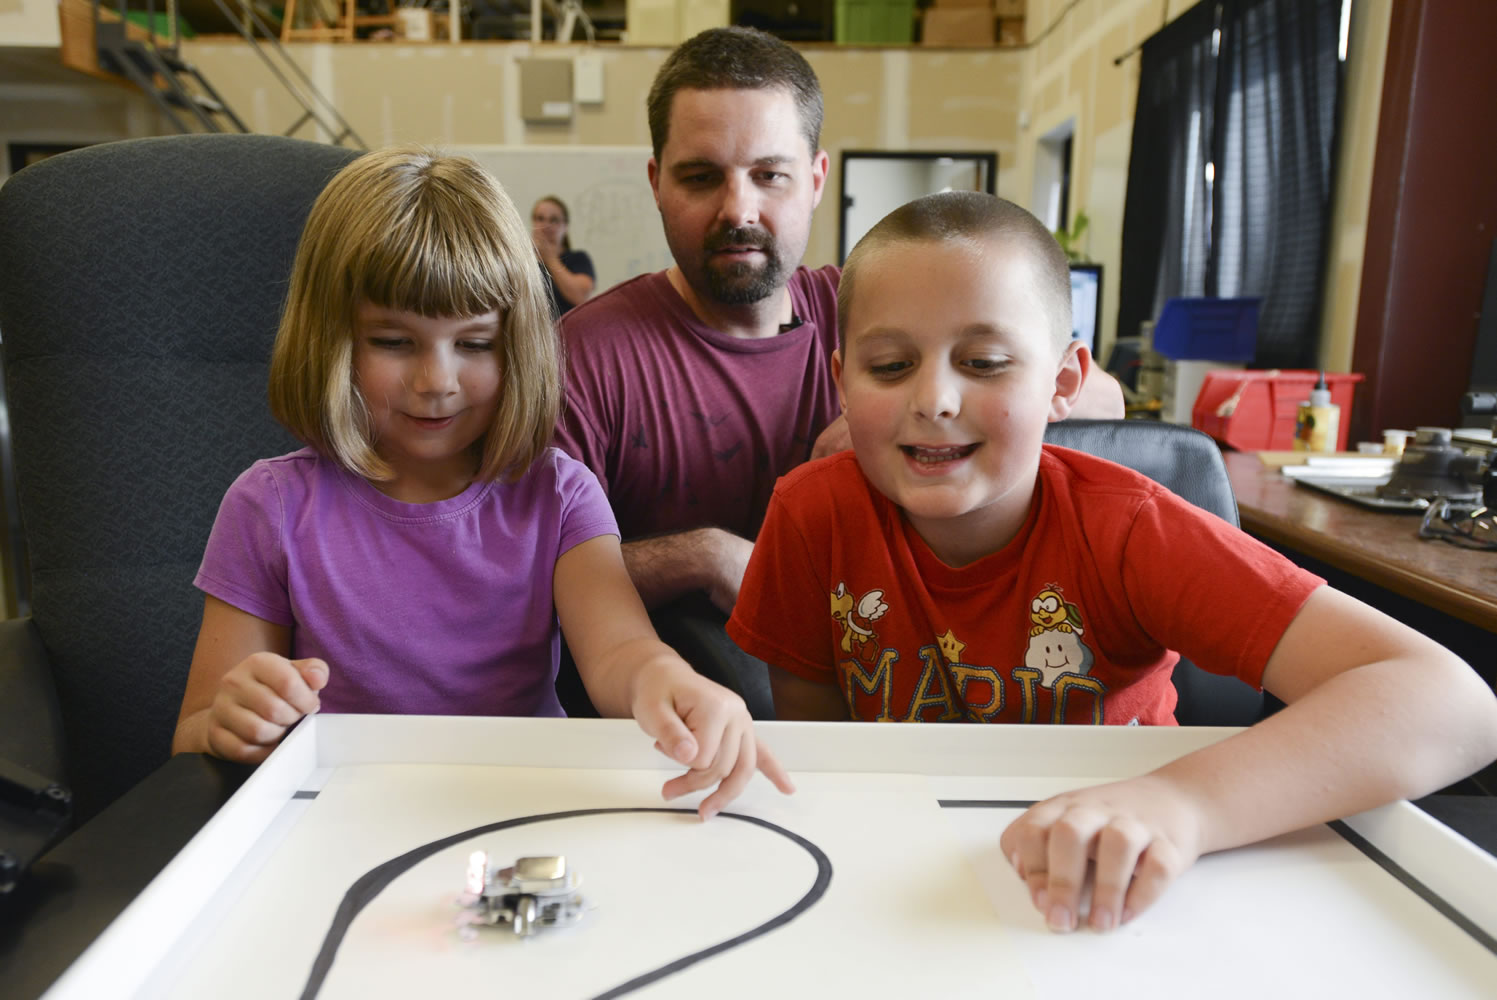 Siblings Hailey and Parker King play with Ringo, a robotic toy they helped design with their dad, Kevin King, center, on Thursday. Kevin King recently raised more than $80,000 on Kickstarter to start manufacturing and selling the robotic toys out of their Vancouver workshop.